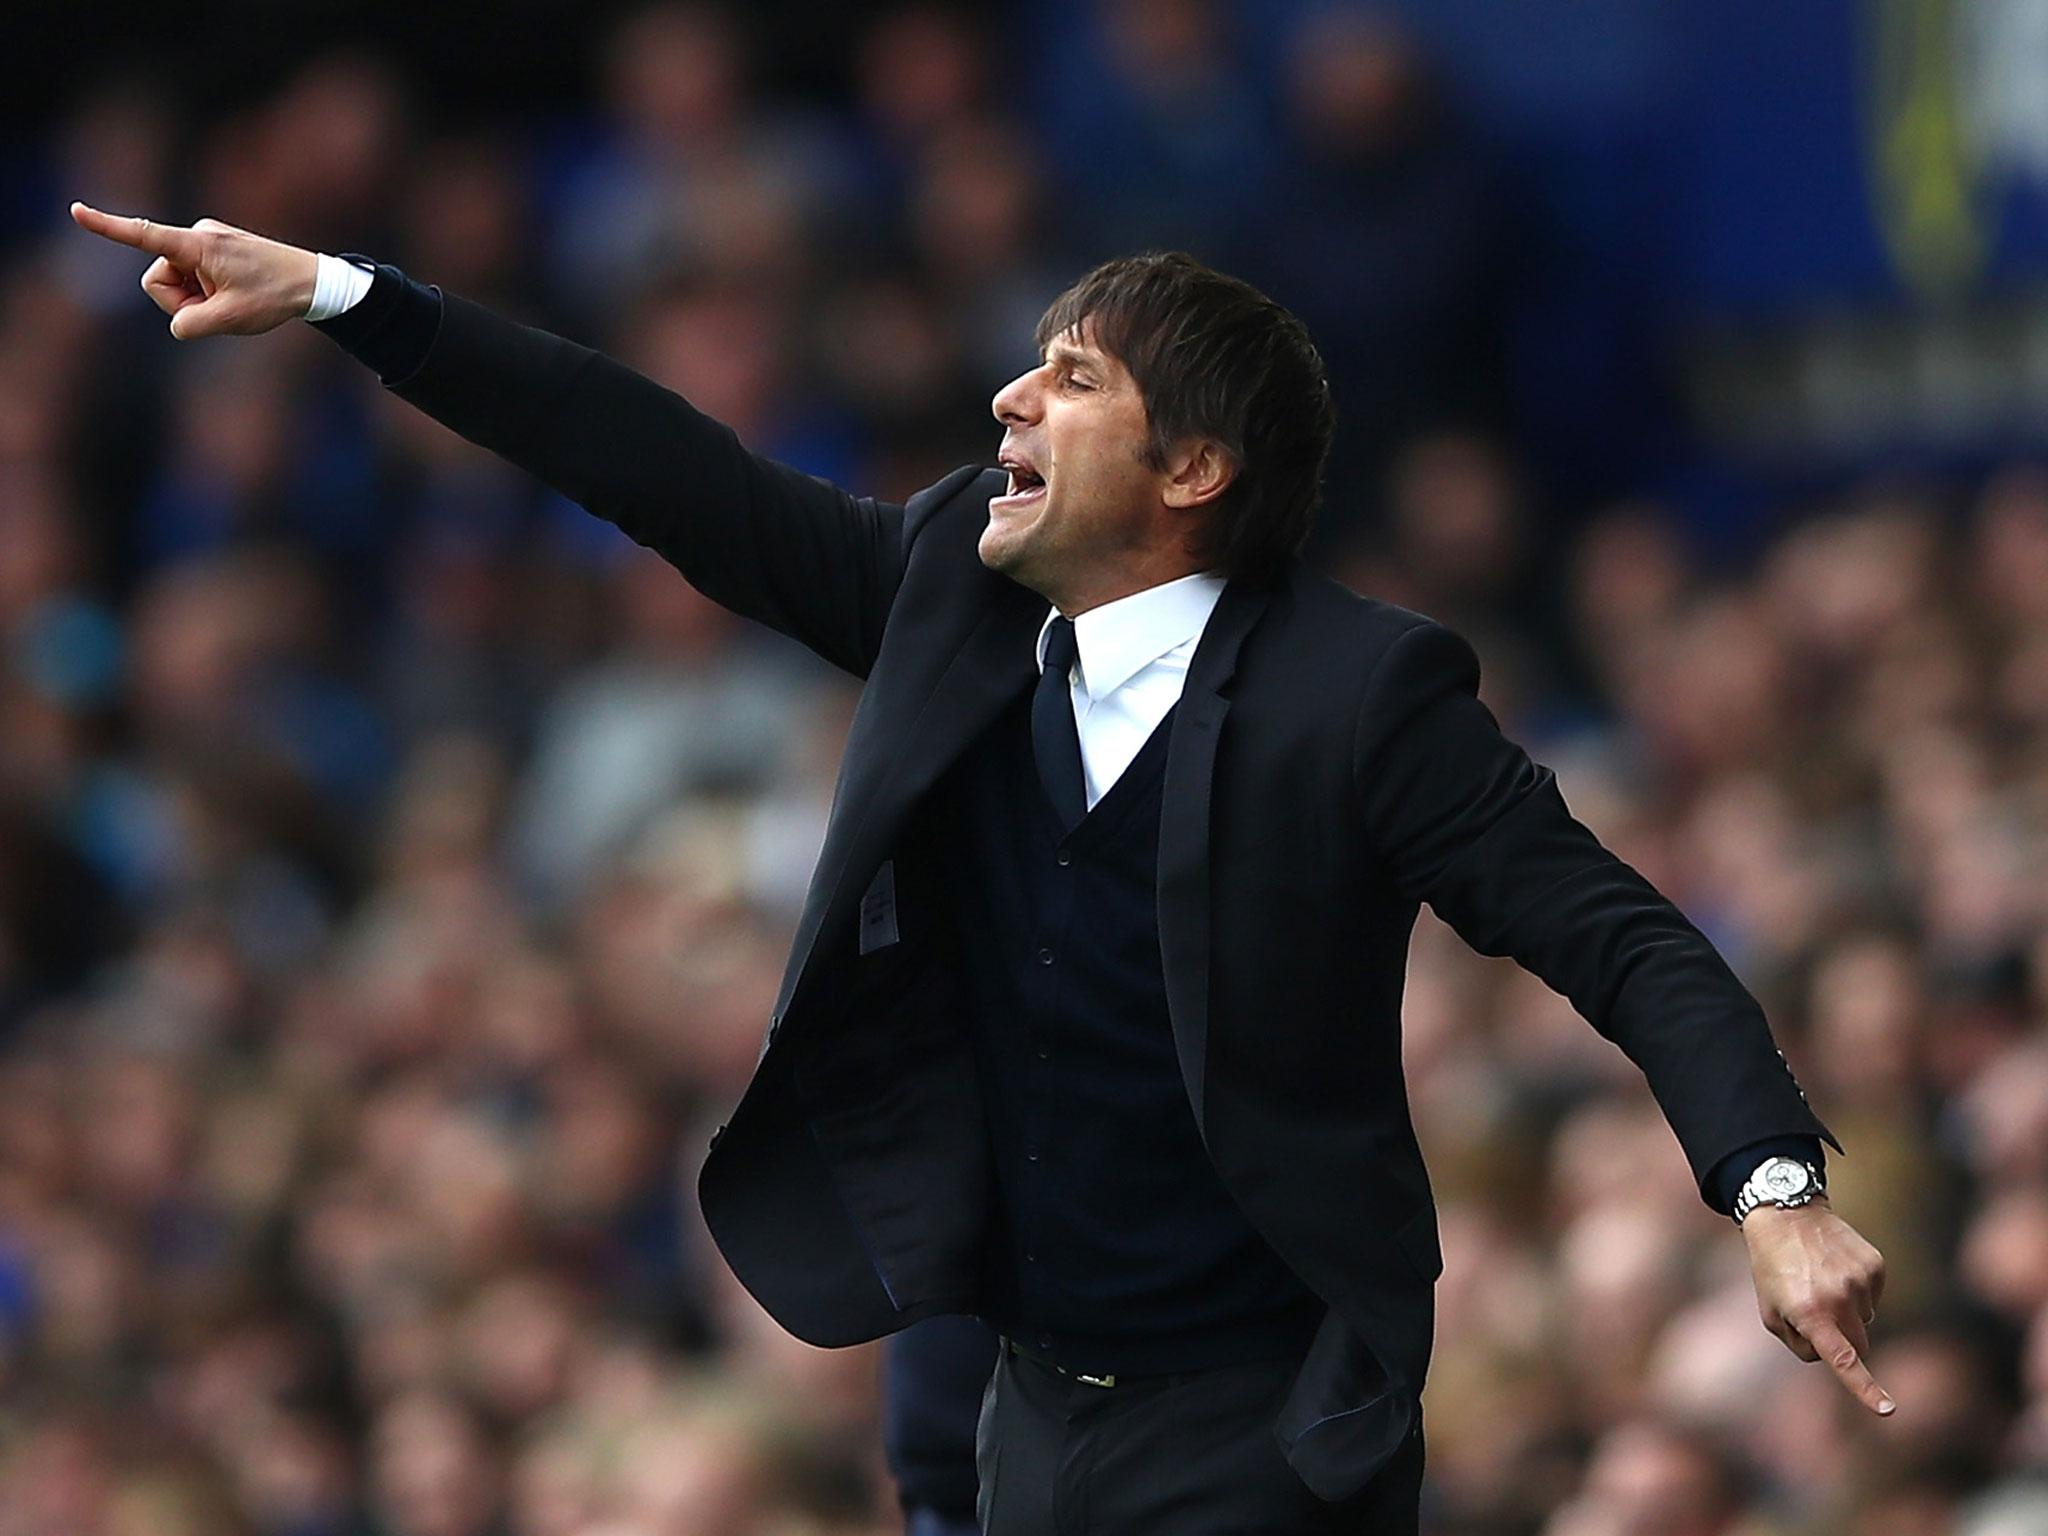 Antonio Conte can almost feel that Premier League trophy in his grip